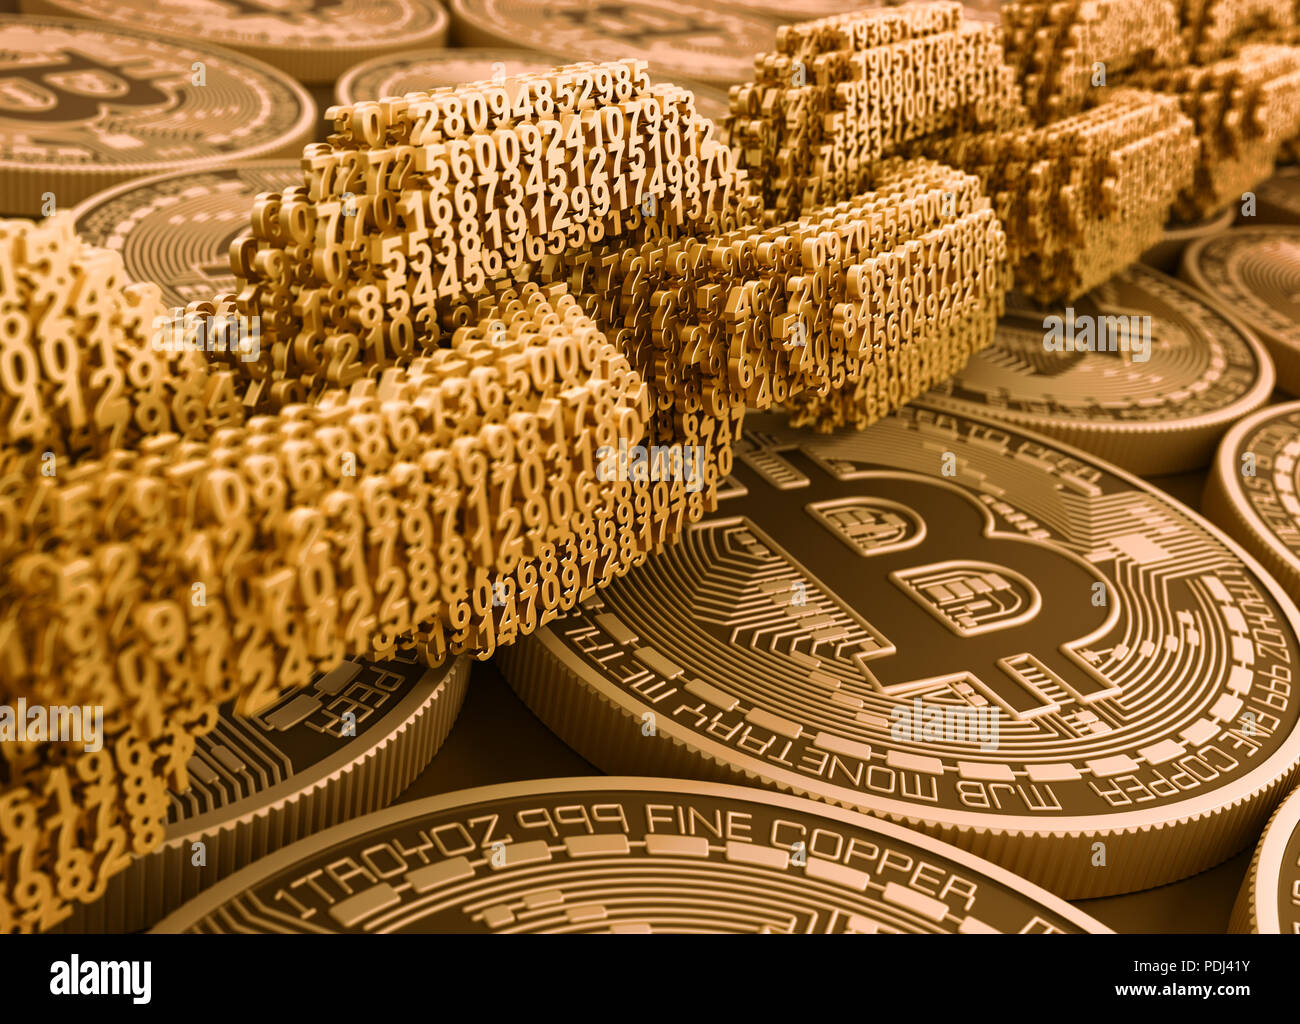 Concept Of Blockchain. Digital Chain Of Interconnected 3D Numbers On Bitcoins. 3D Illustration. Stock Photo